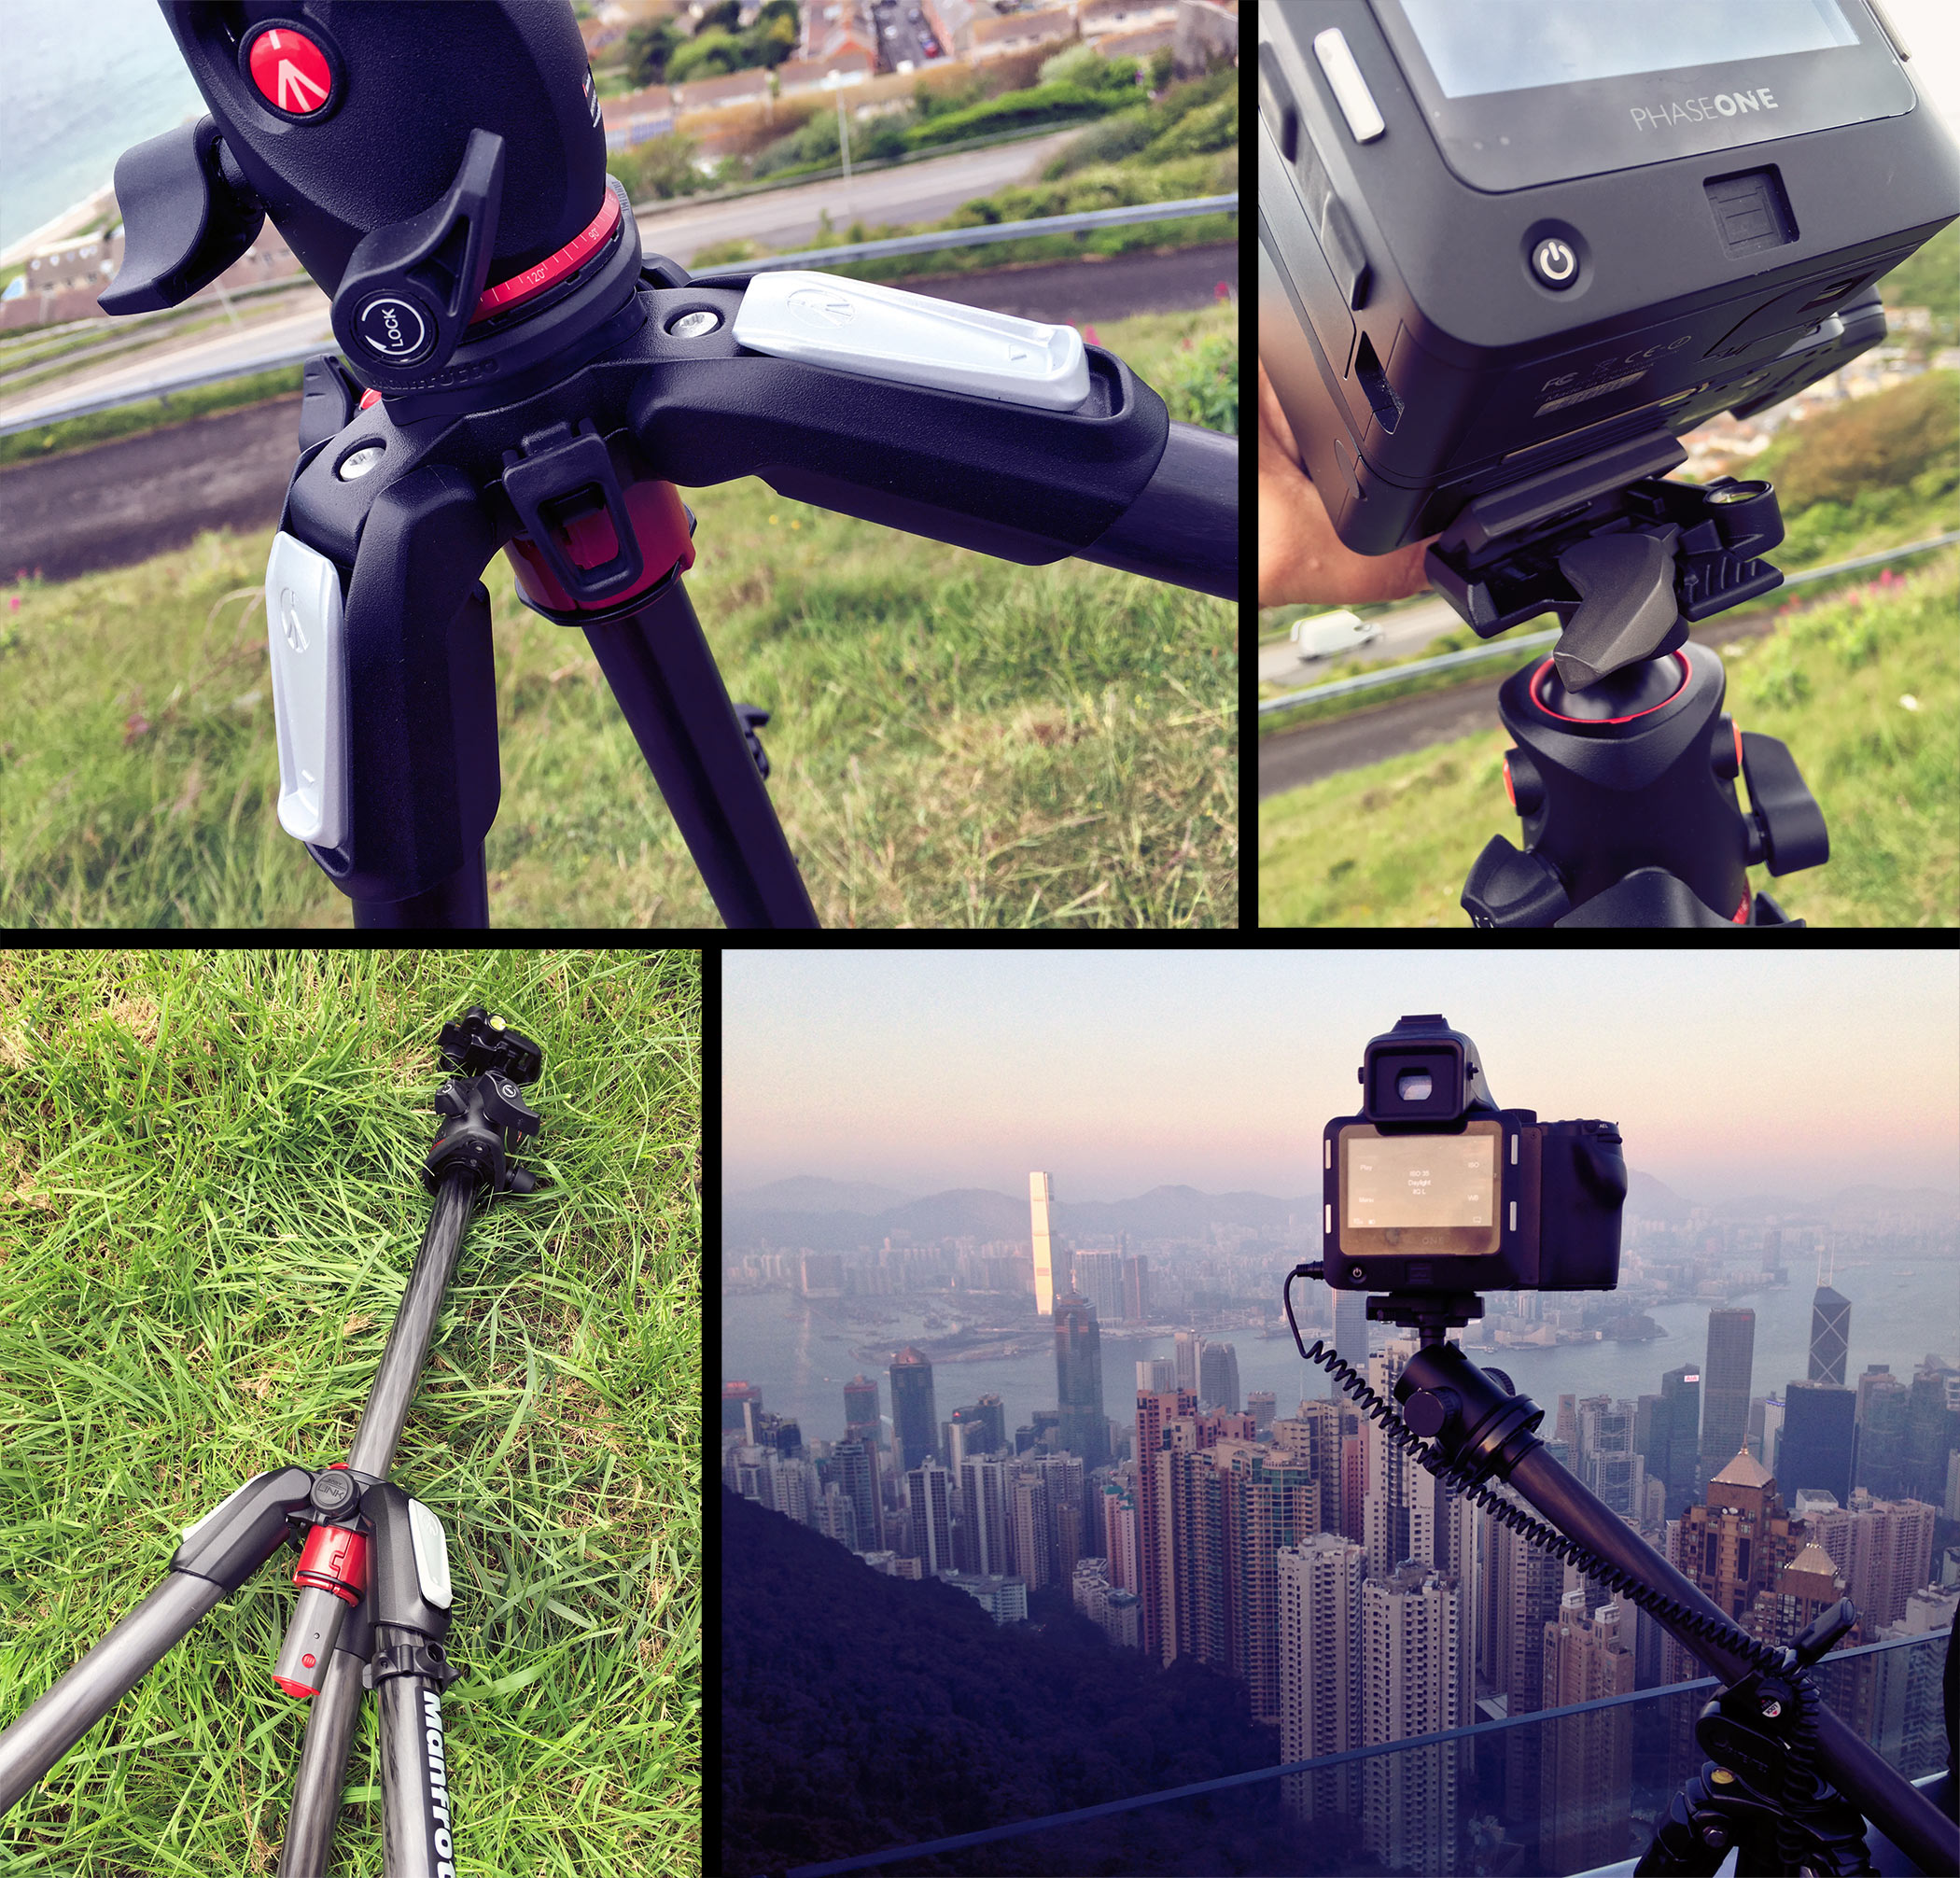 tripod buyers guide paul reiffer professional top landscape photographer photography fine art manfrotto giottos gitzo field test review